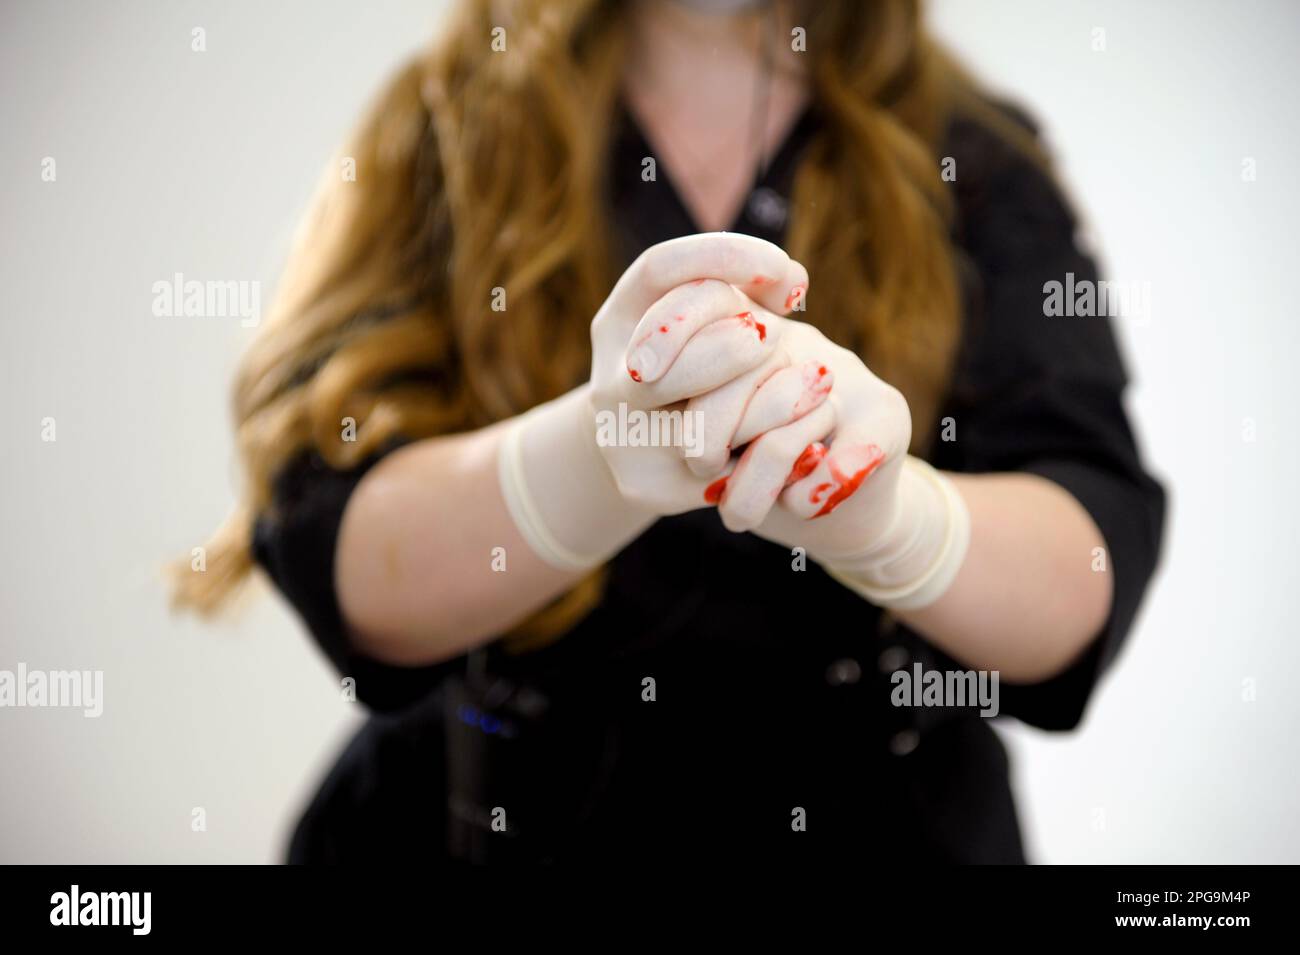 Hand showing stop sign in latex glove with blood. The bloody hand isolated on white background. Social violence and insecurity concept. Part of set. High quality photo Stock Photo